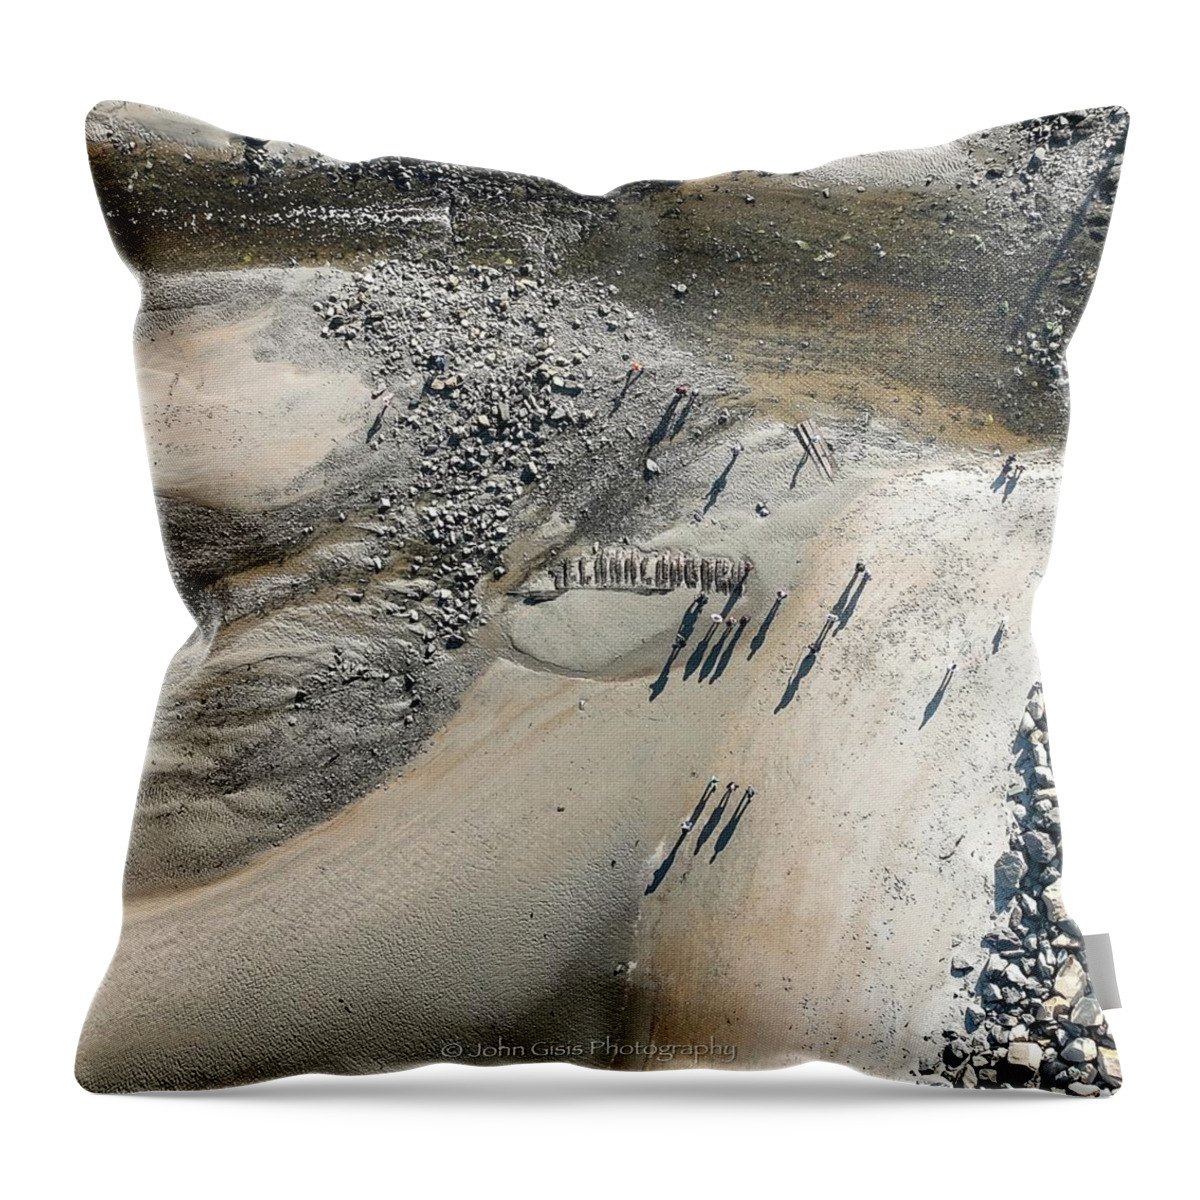  Throw Pillow featuring the photograph Lizzie Carr shipwreck remnants #1 by John Gisis